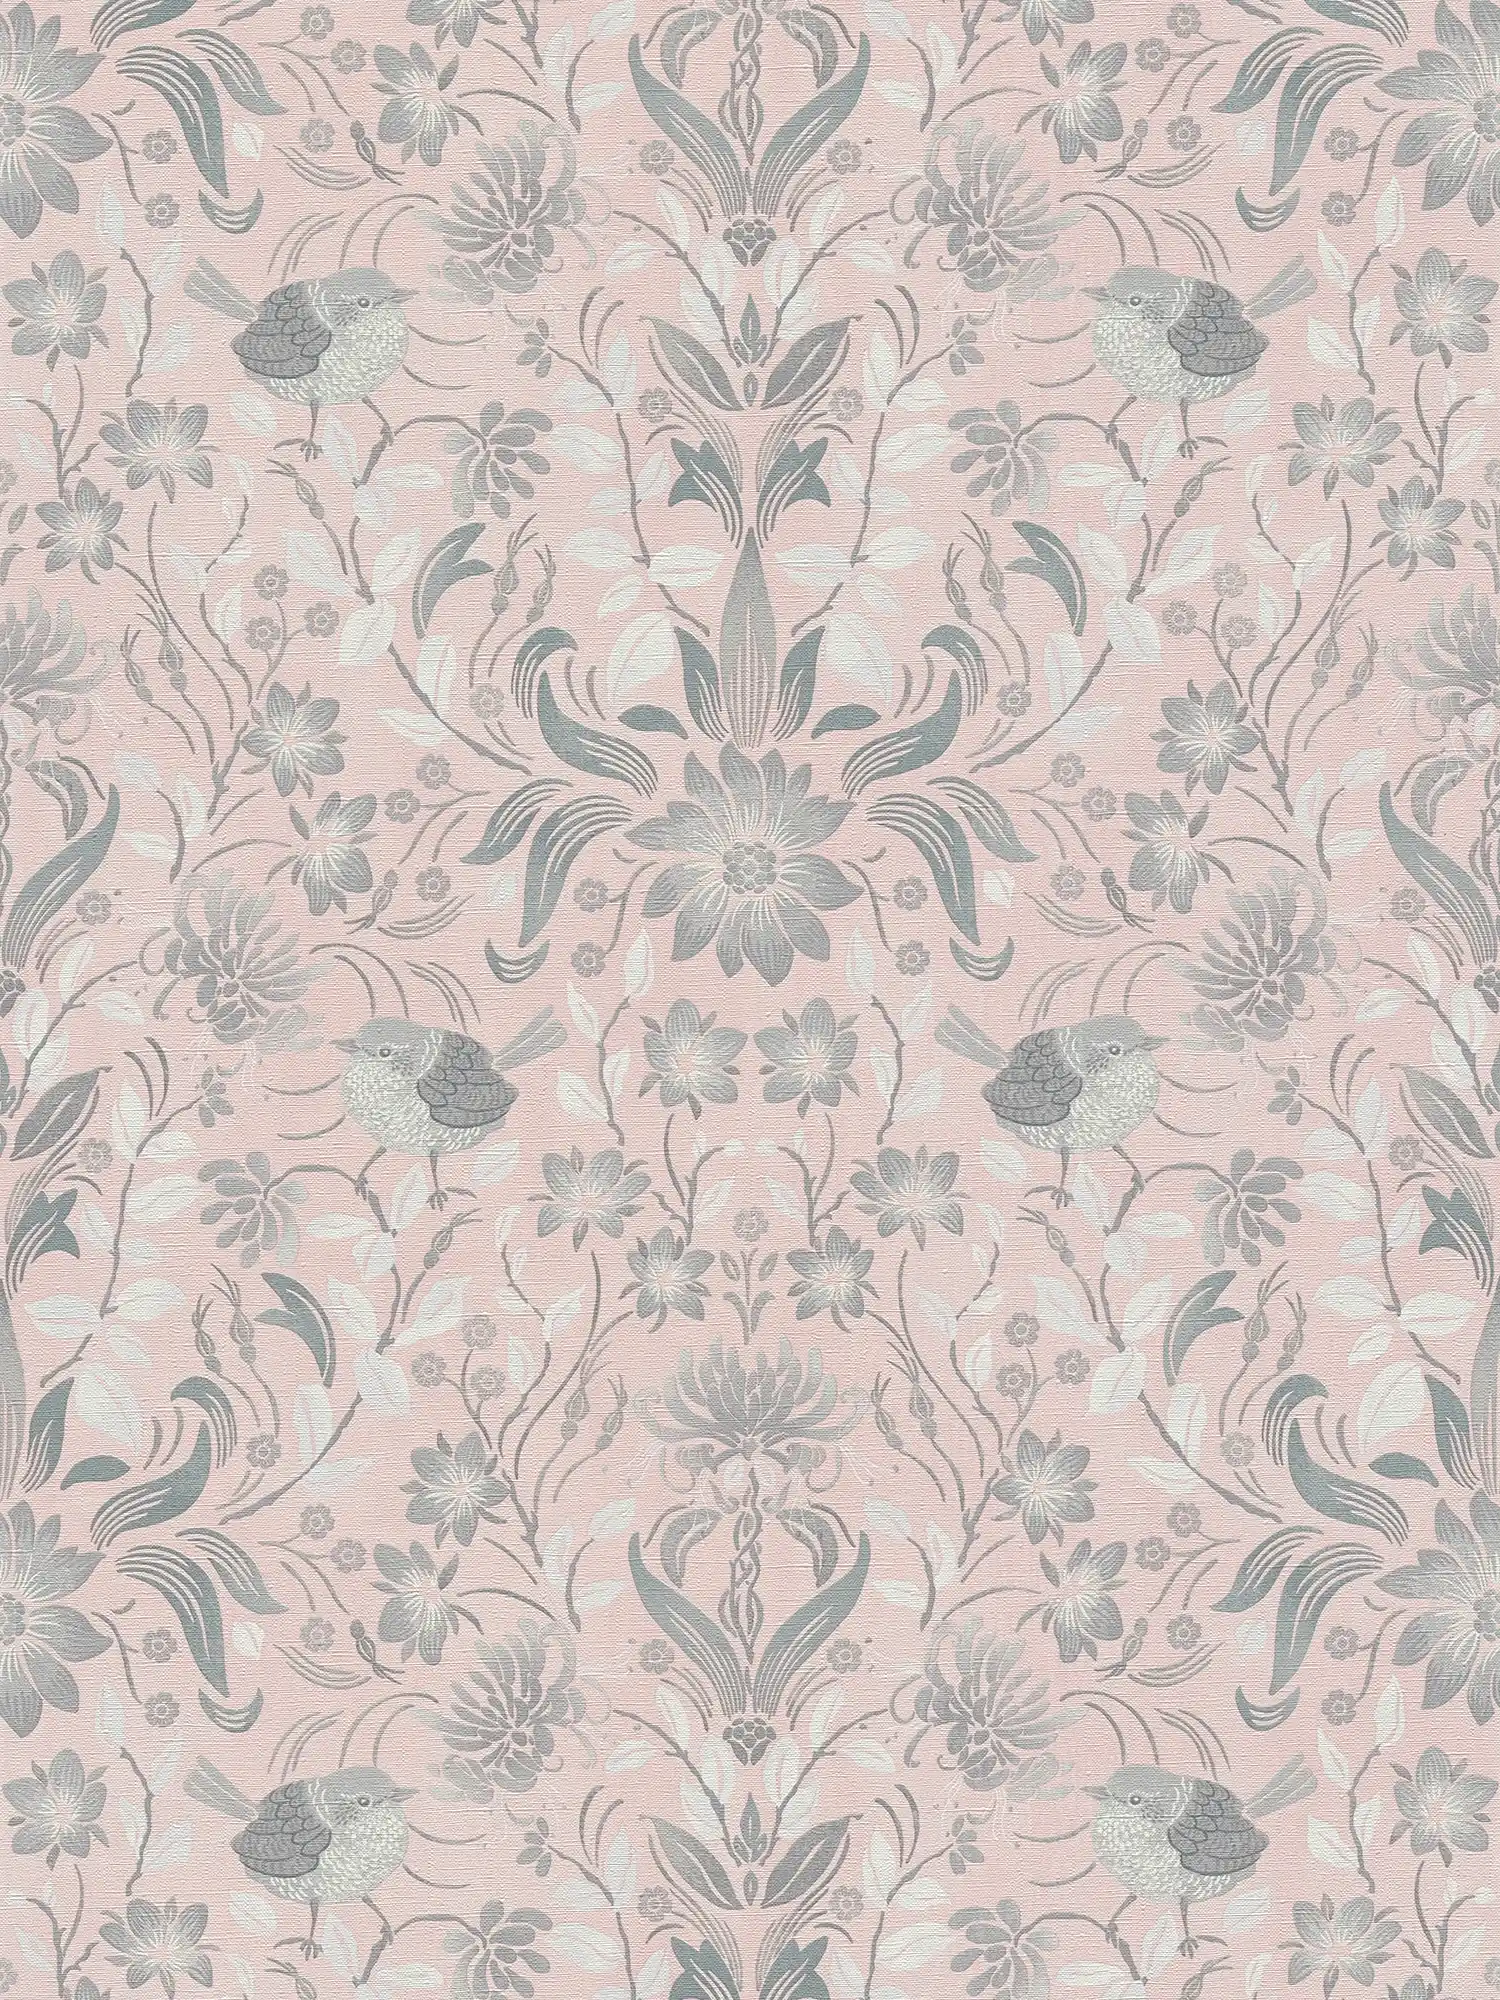 Birds and flowers wallpaper - pink, grey, white
